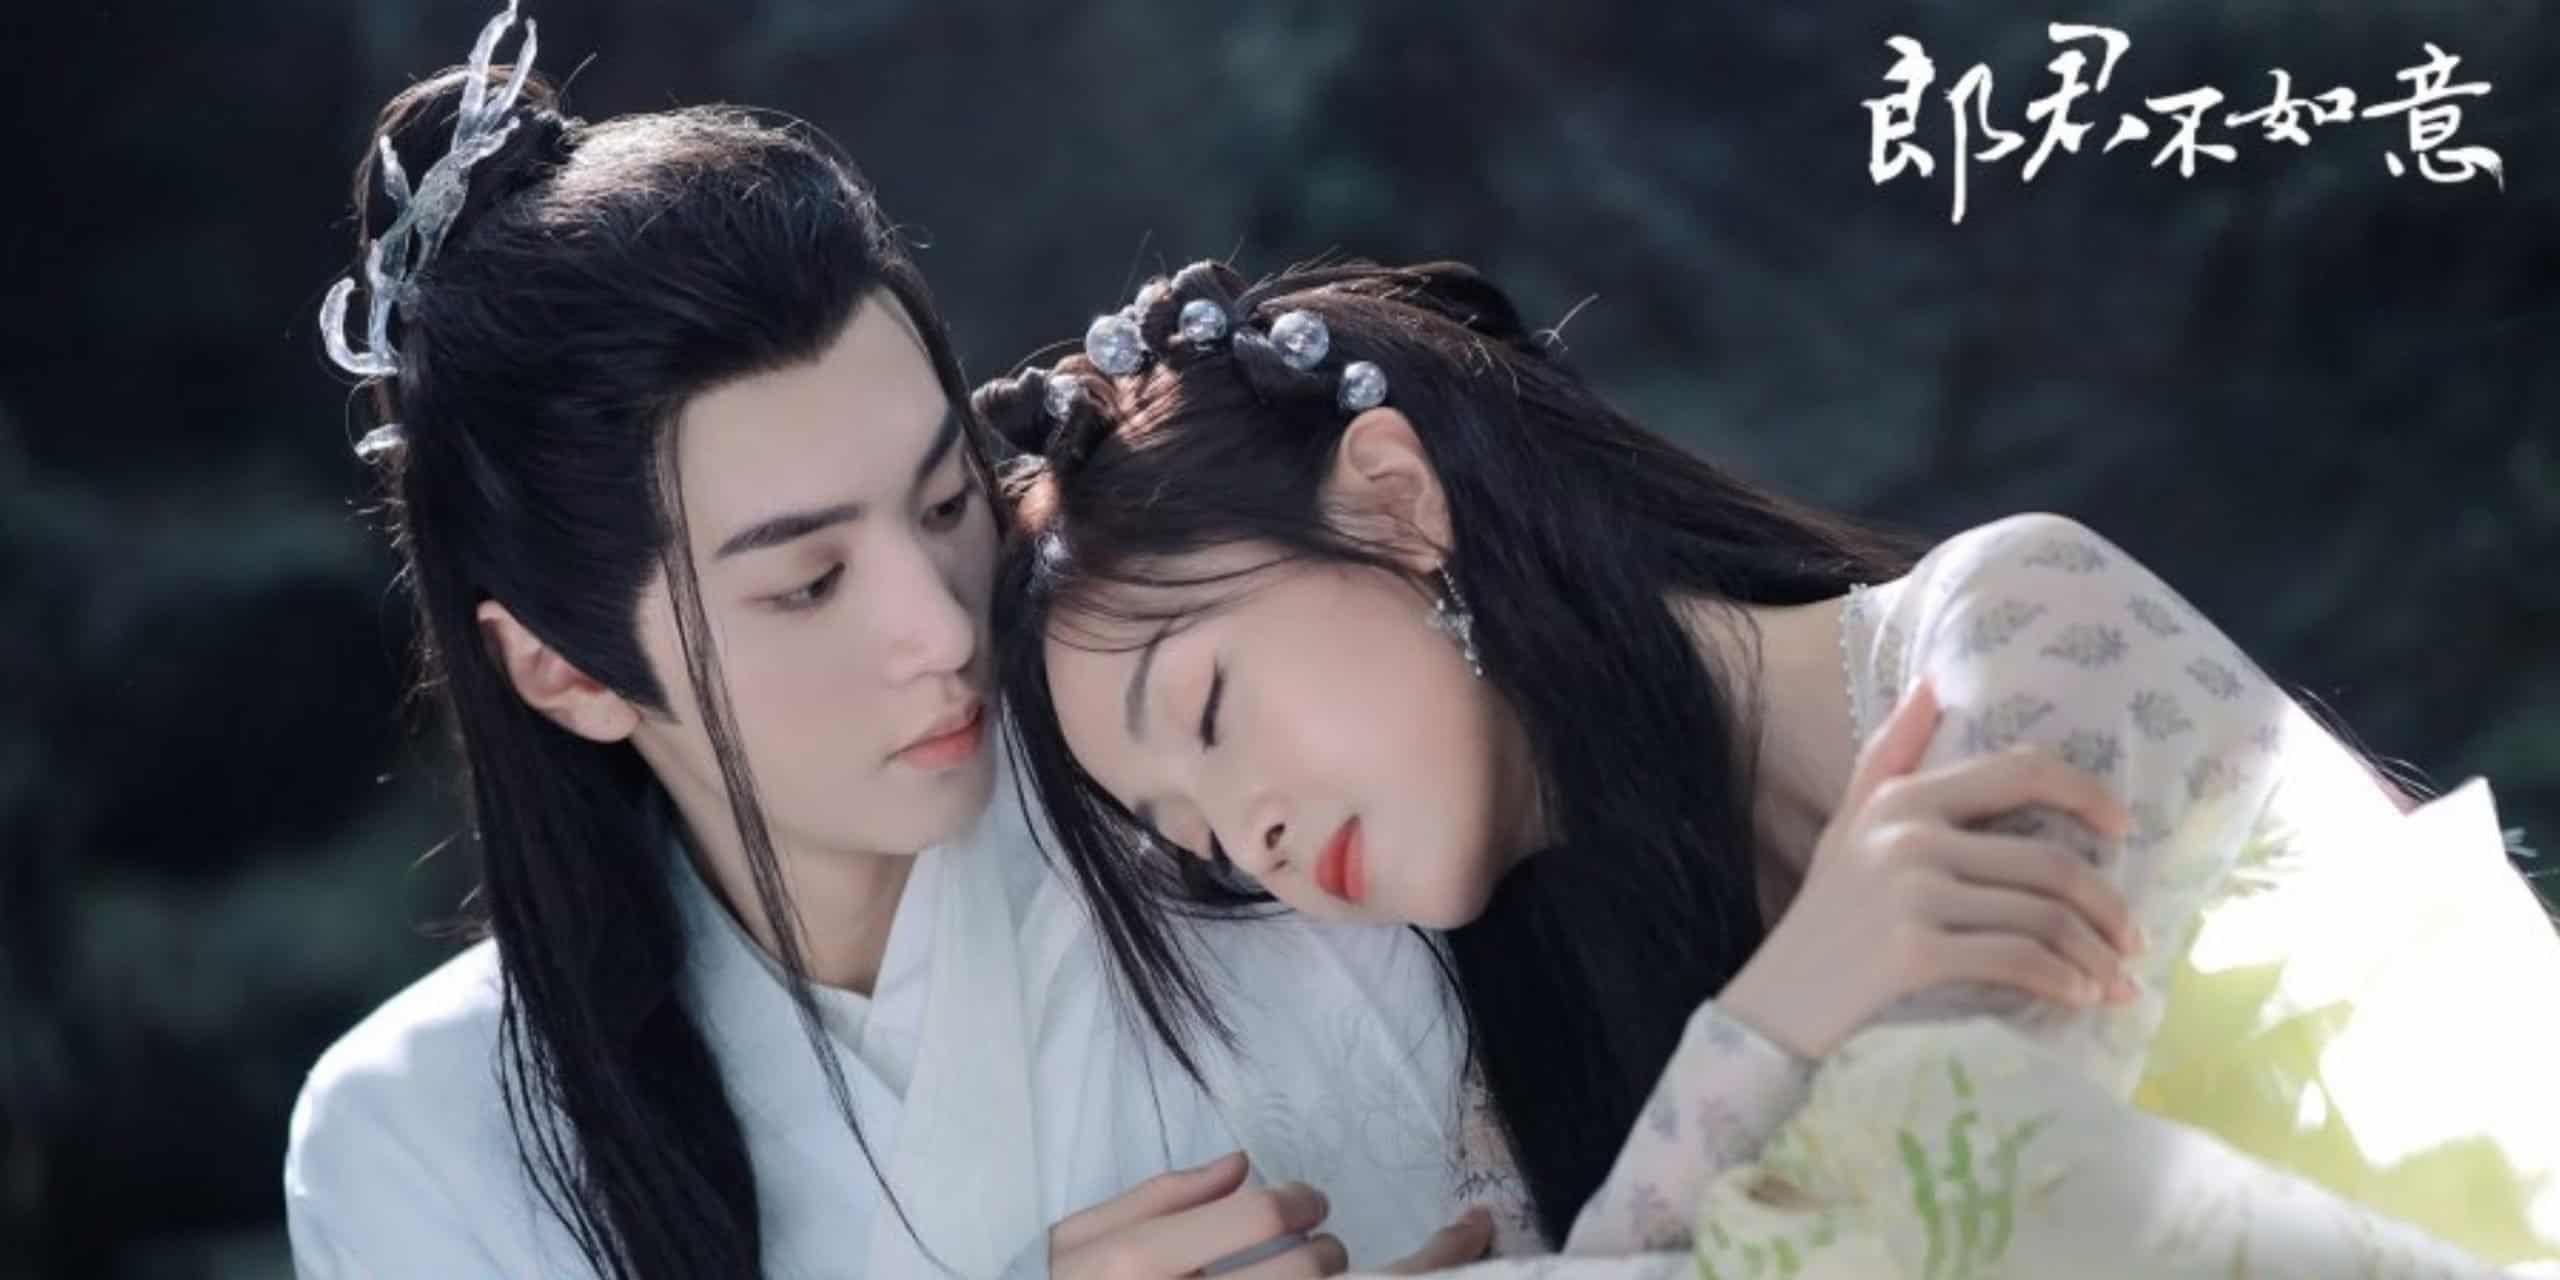 Chinese Fantasy Drama The Princess and The Werewolf Episode 21 Synopsis